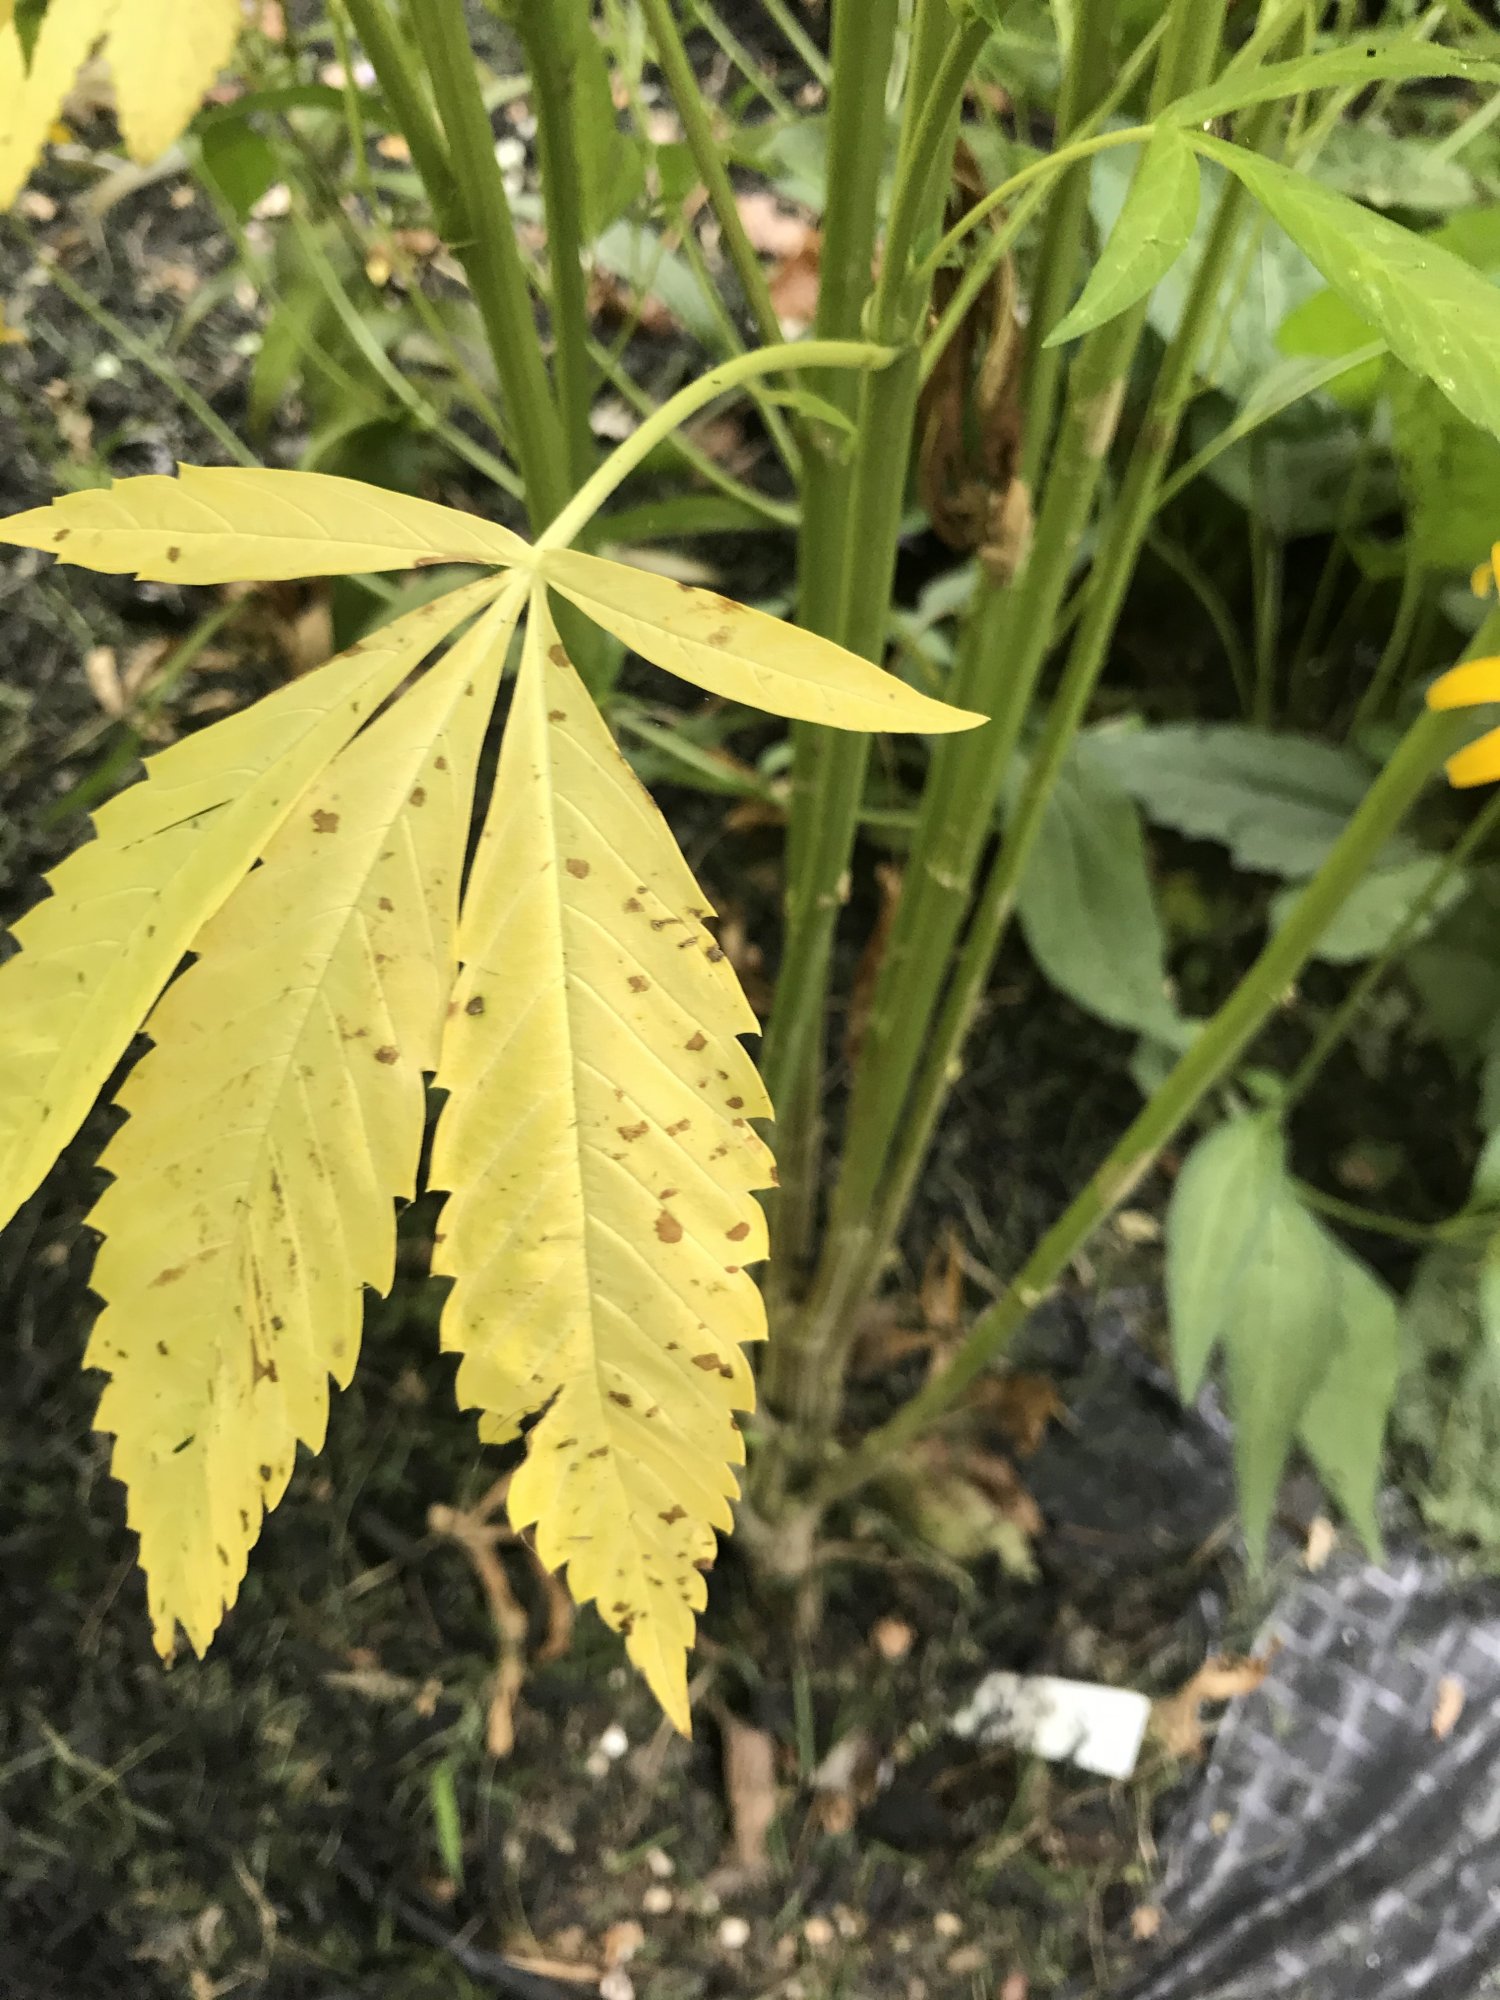 Should leaves be this yellow during flower